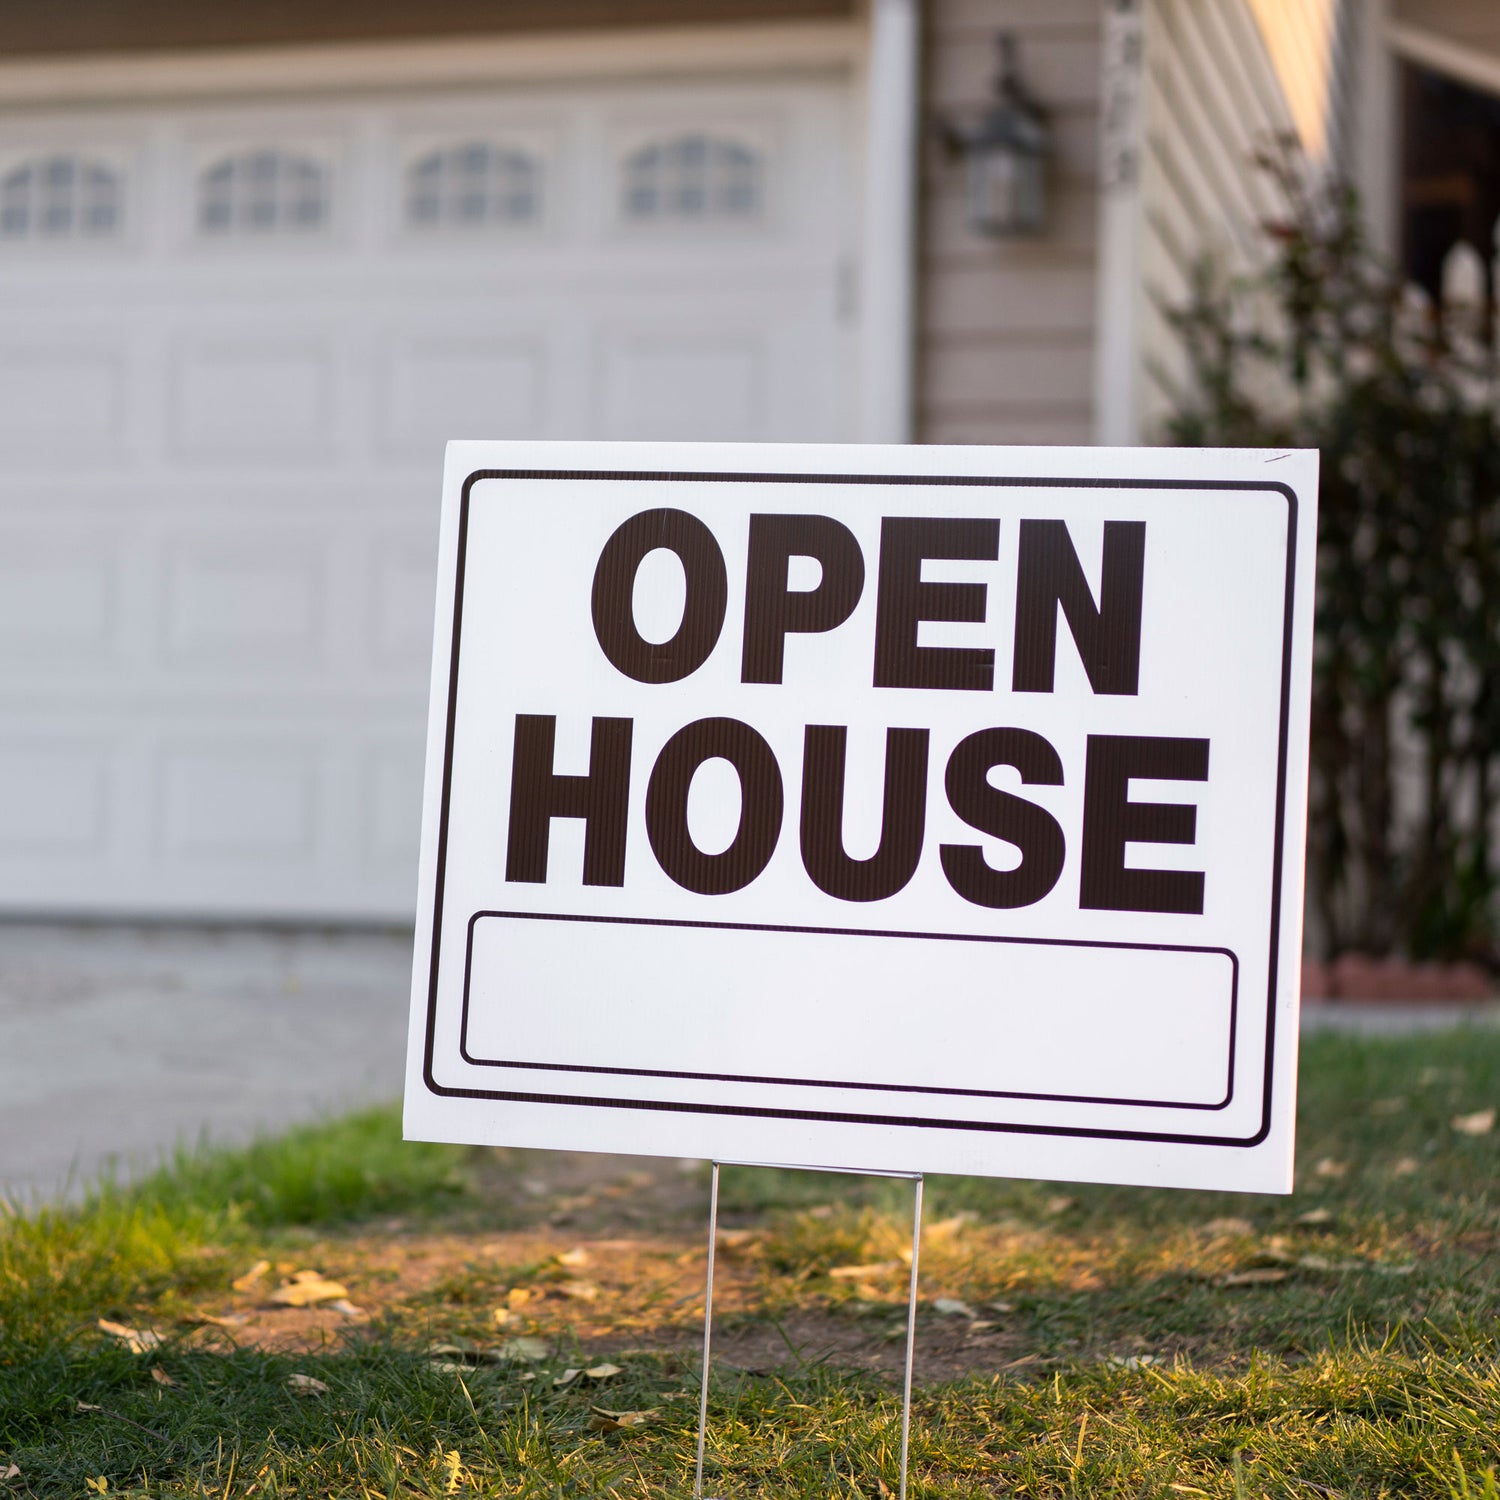 Image by Freepik. Open house coroplast step-stake lawn sign.